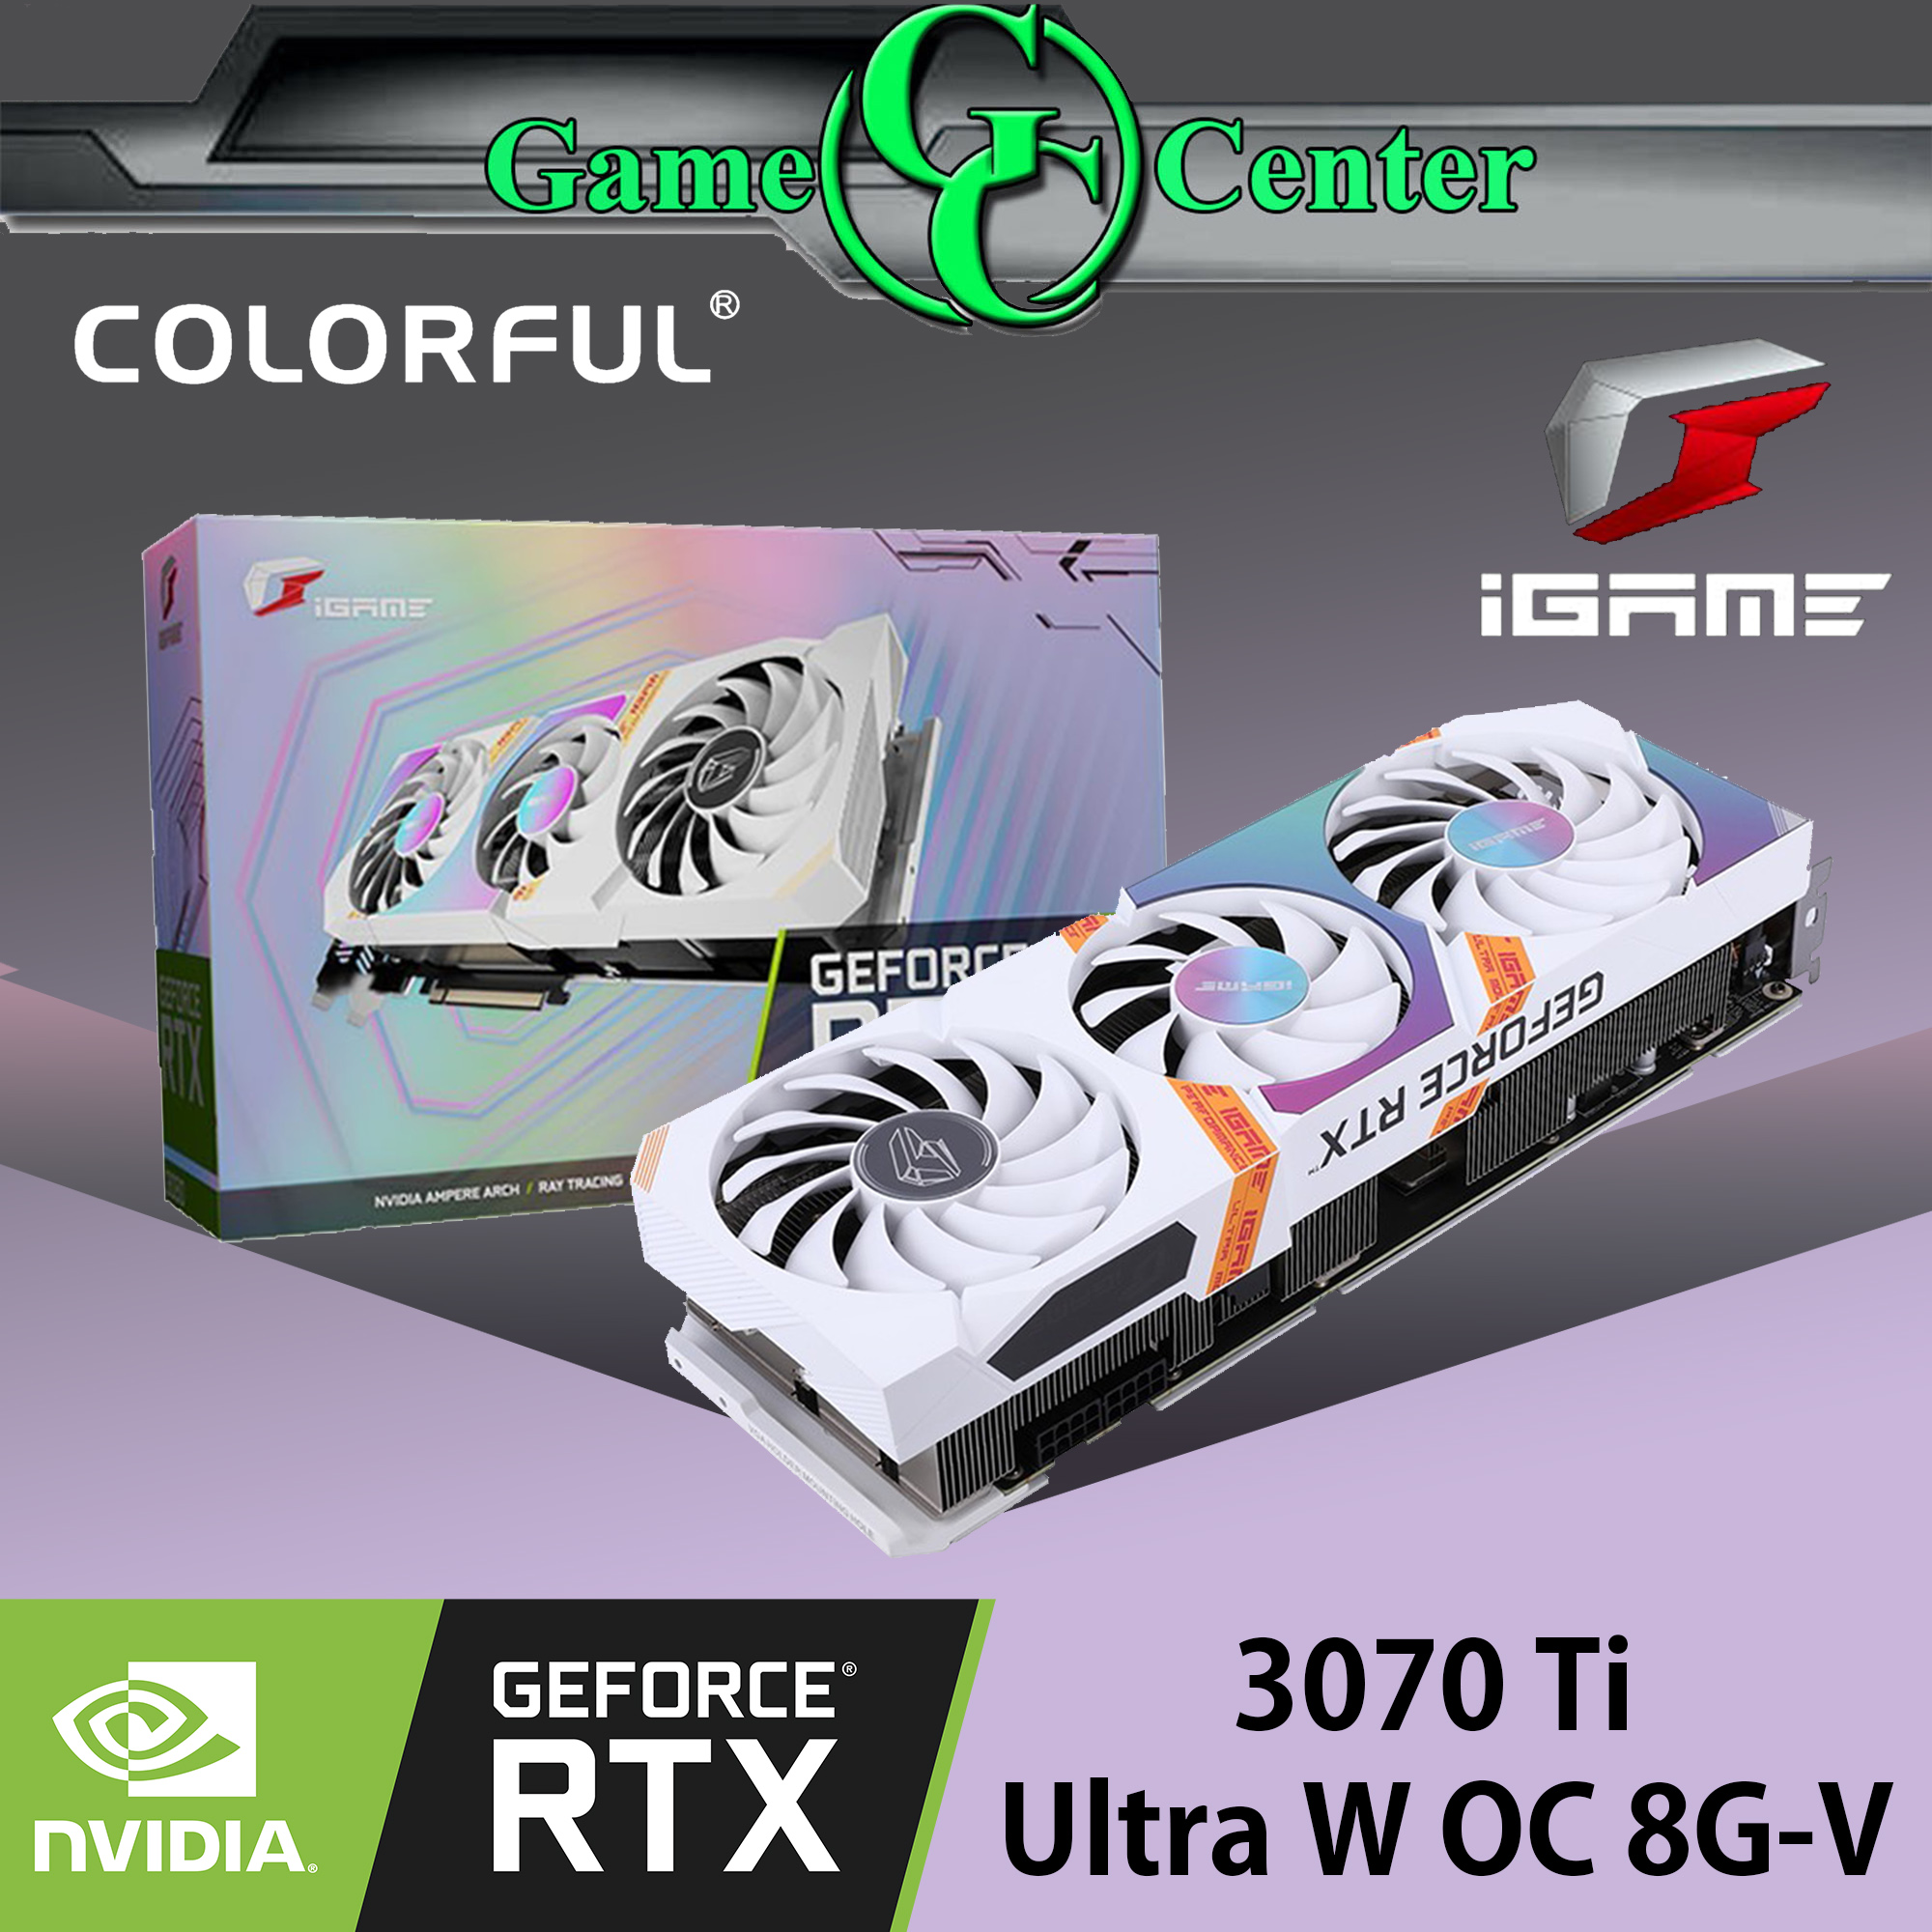 Colorful Geforce Rtx 3070 Ti Ultra W Oc 8g V Igame Series Gddr6x